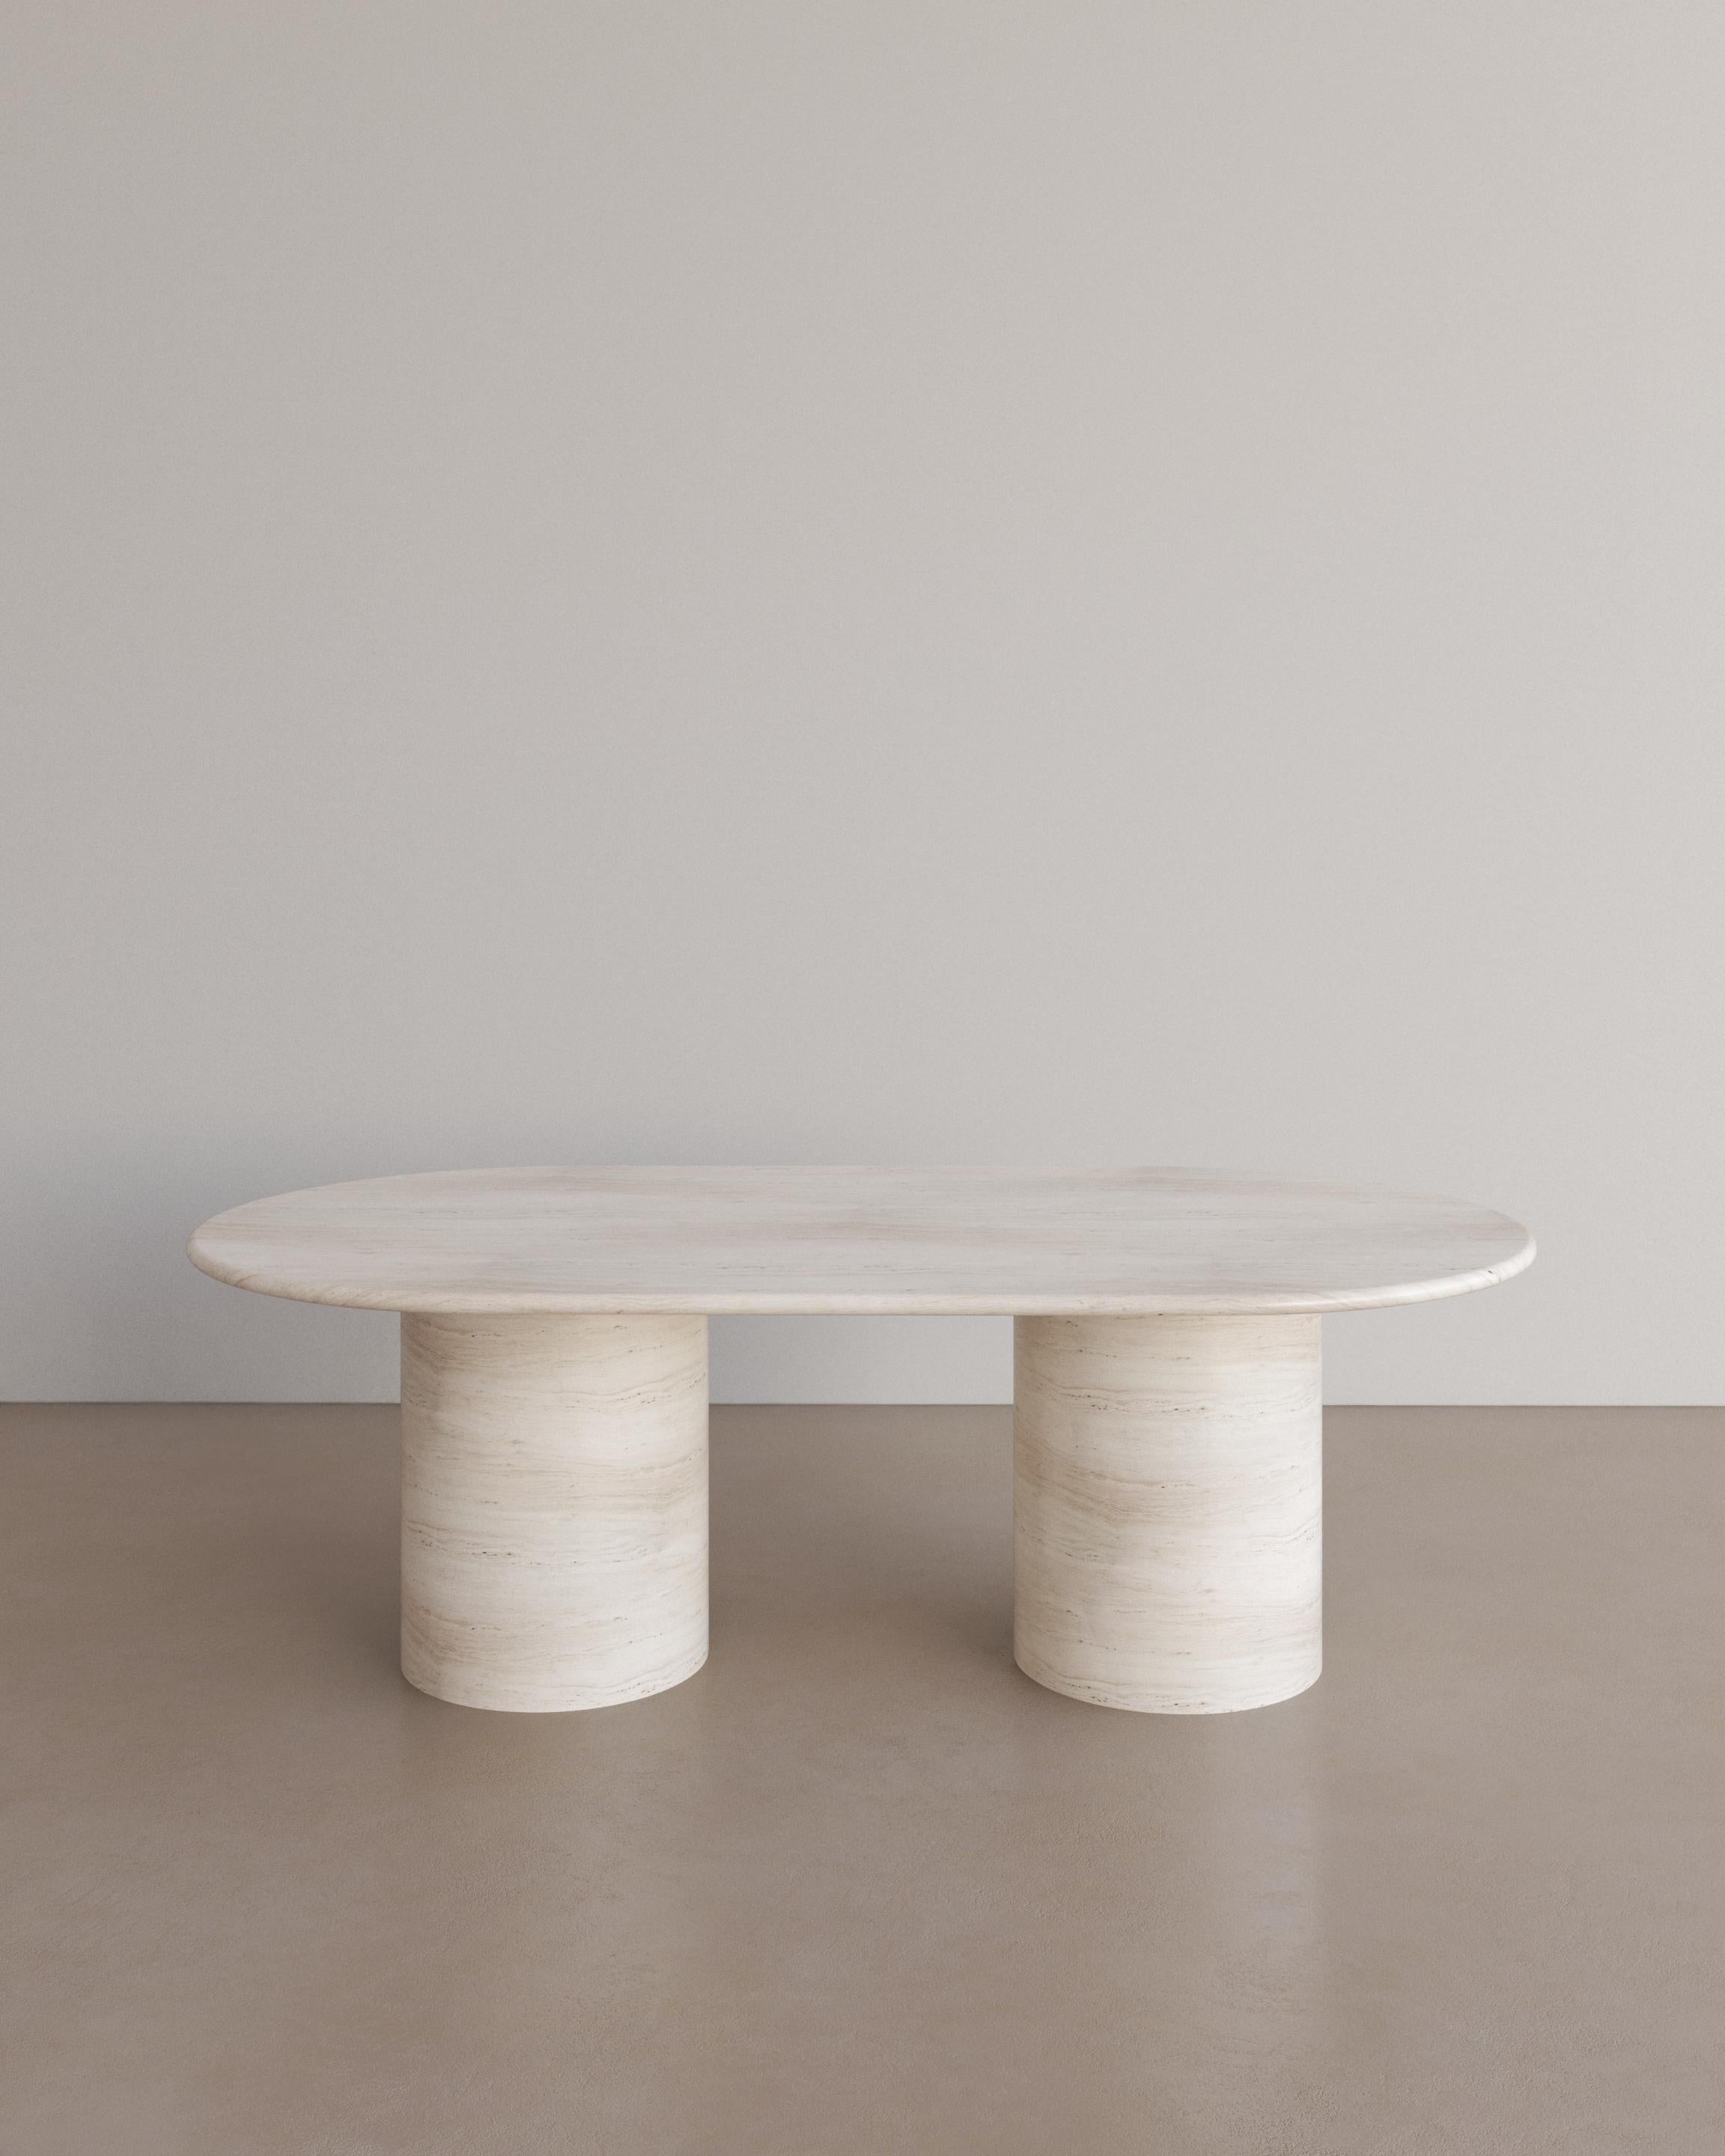 The Voyage Coffee Table I in Verde Alpi celebrates the simple pleasures that define life and replenish the soul through harnessing essential form. Envisioned as an ode to historical elegance, captured through a modern lens of minimalistic